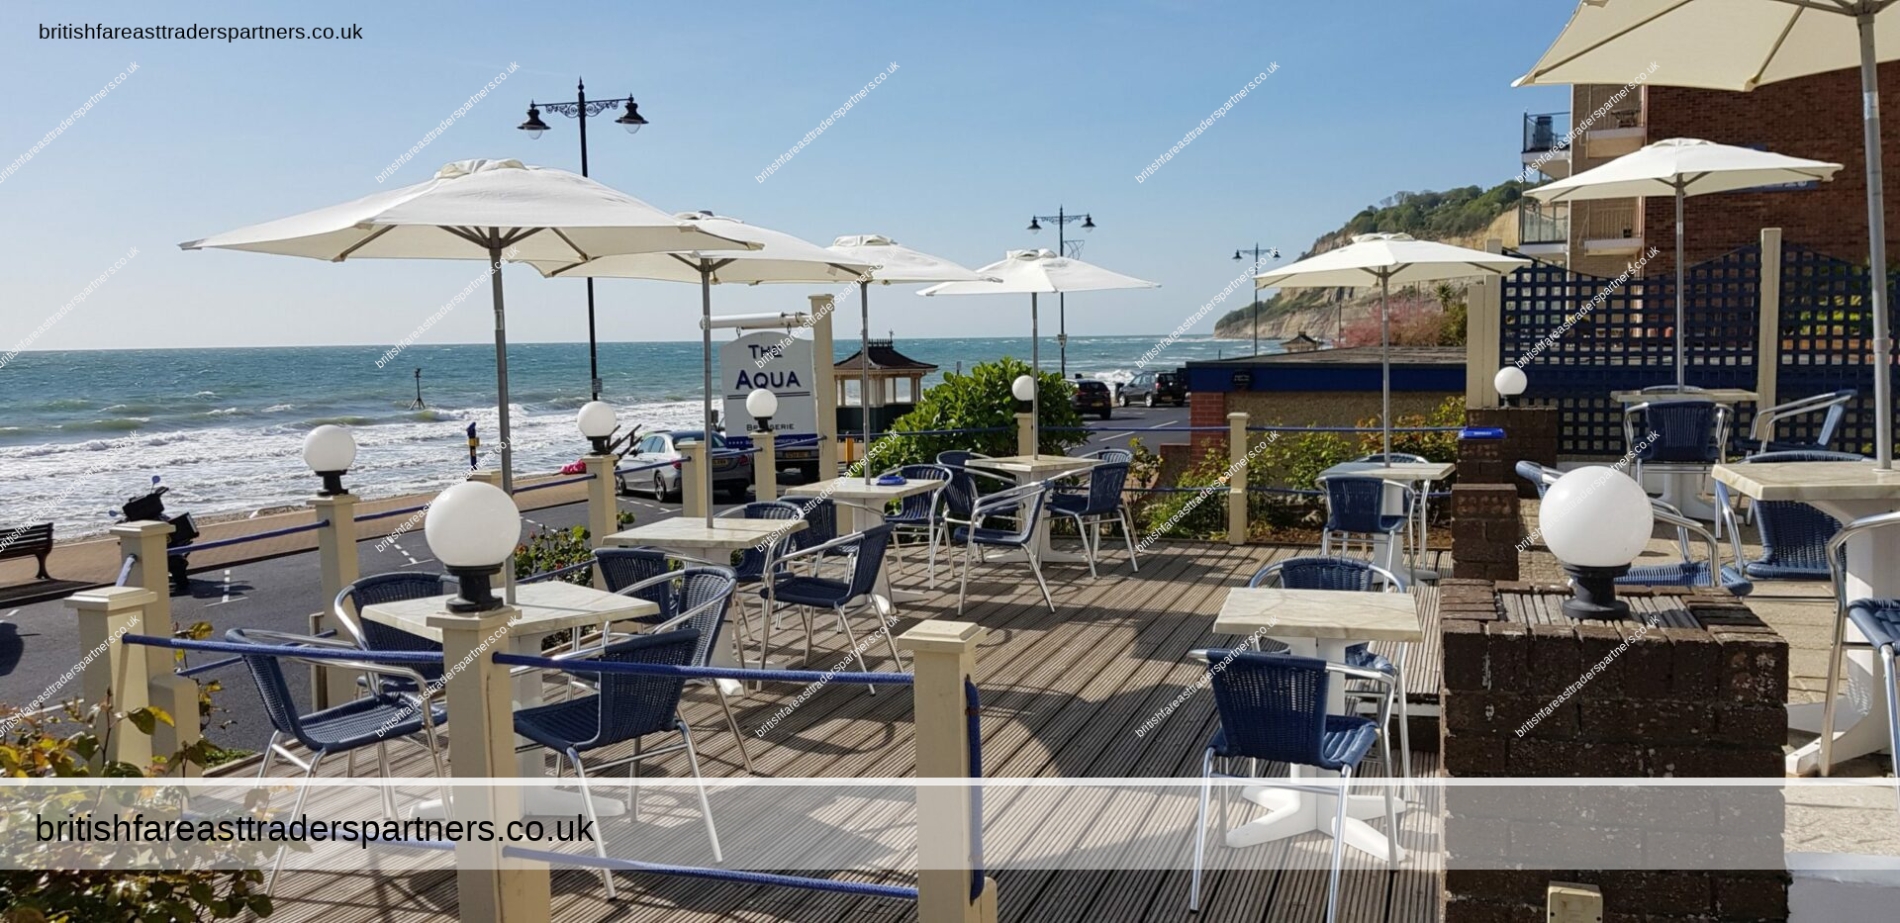 RELAX IN THE LAIDBACK ISLAND LIFESTYLE OF ISLE OF WIGHT UNITED KINGDOM, SHANKLIN BEACHES & ESPLANADE